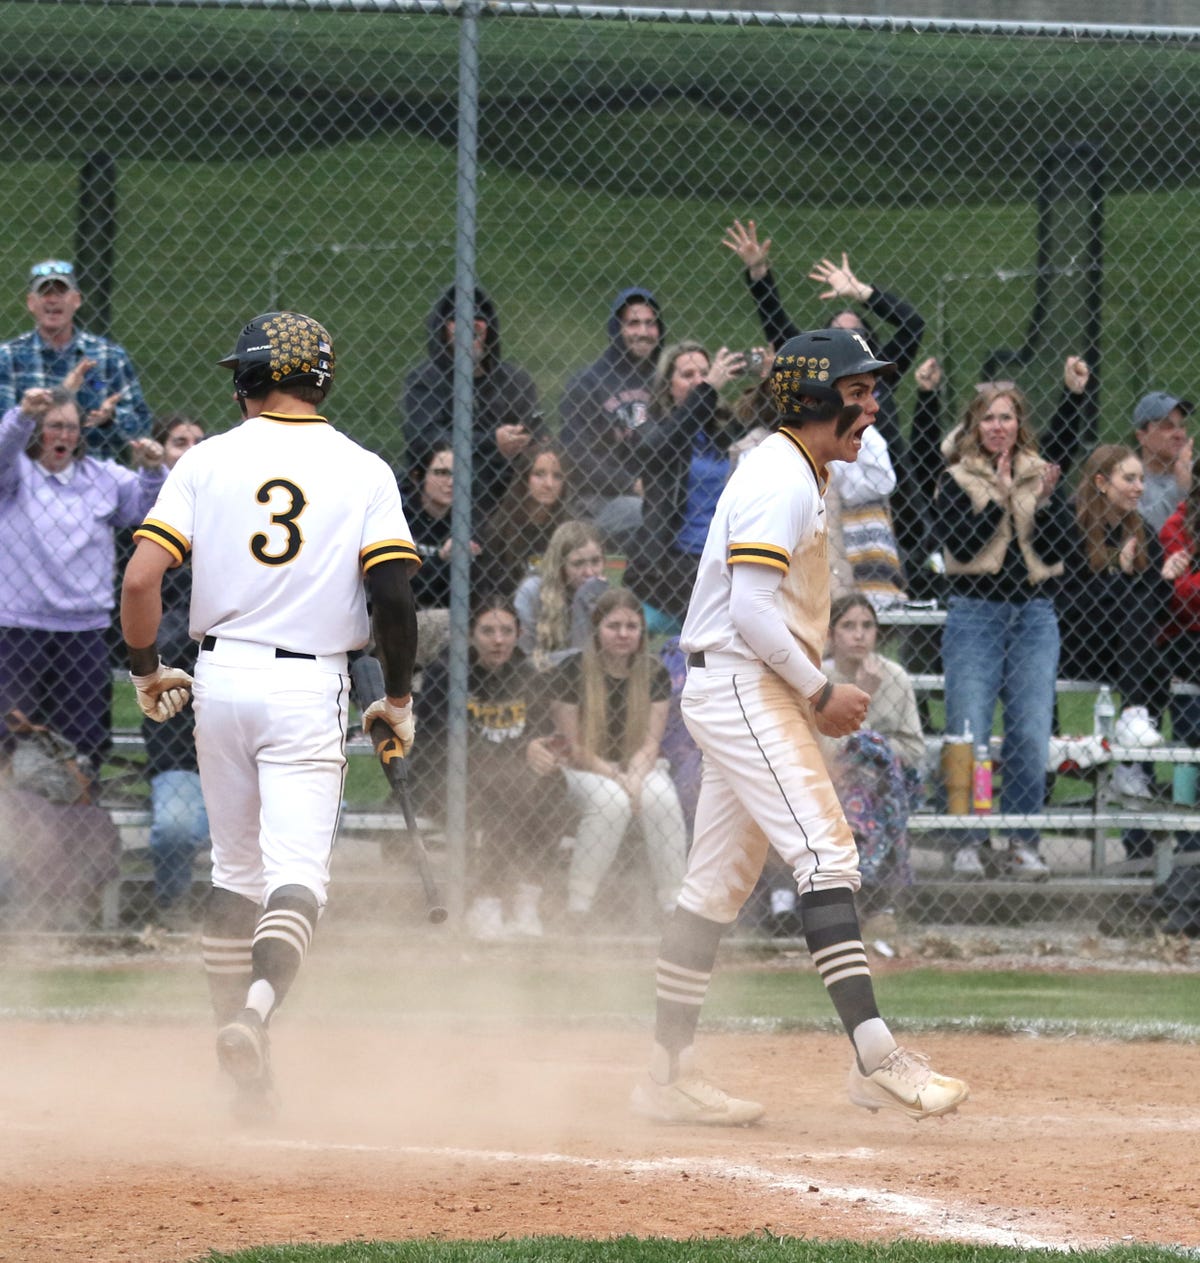 Tri-Valley Baseball Dominates Sheridan with Hindel’s Big Hit and Kaufman’s Pitching Brilliance